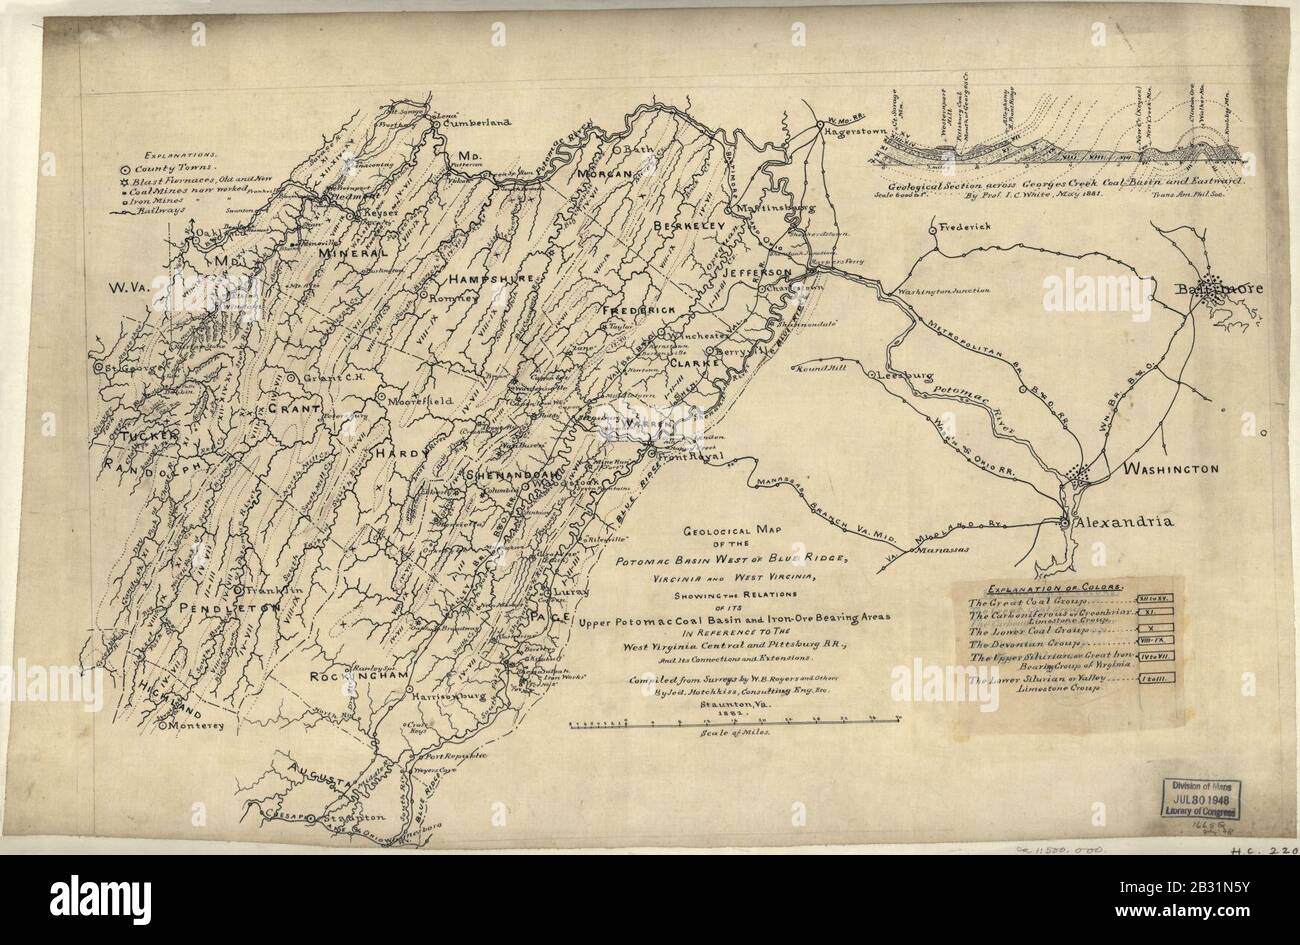 Geological map of the Potomac basin west of Blue Ridge, Virginia and ...